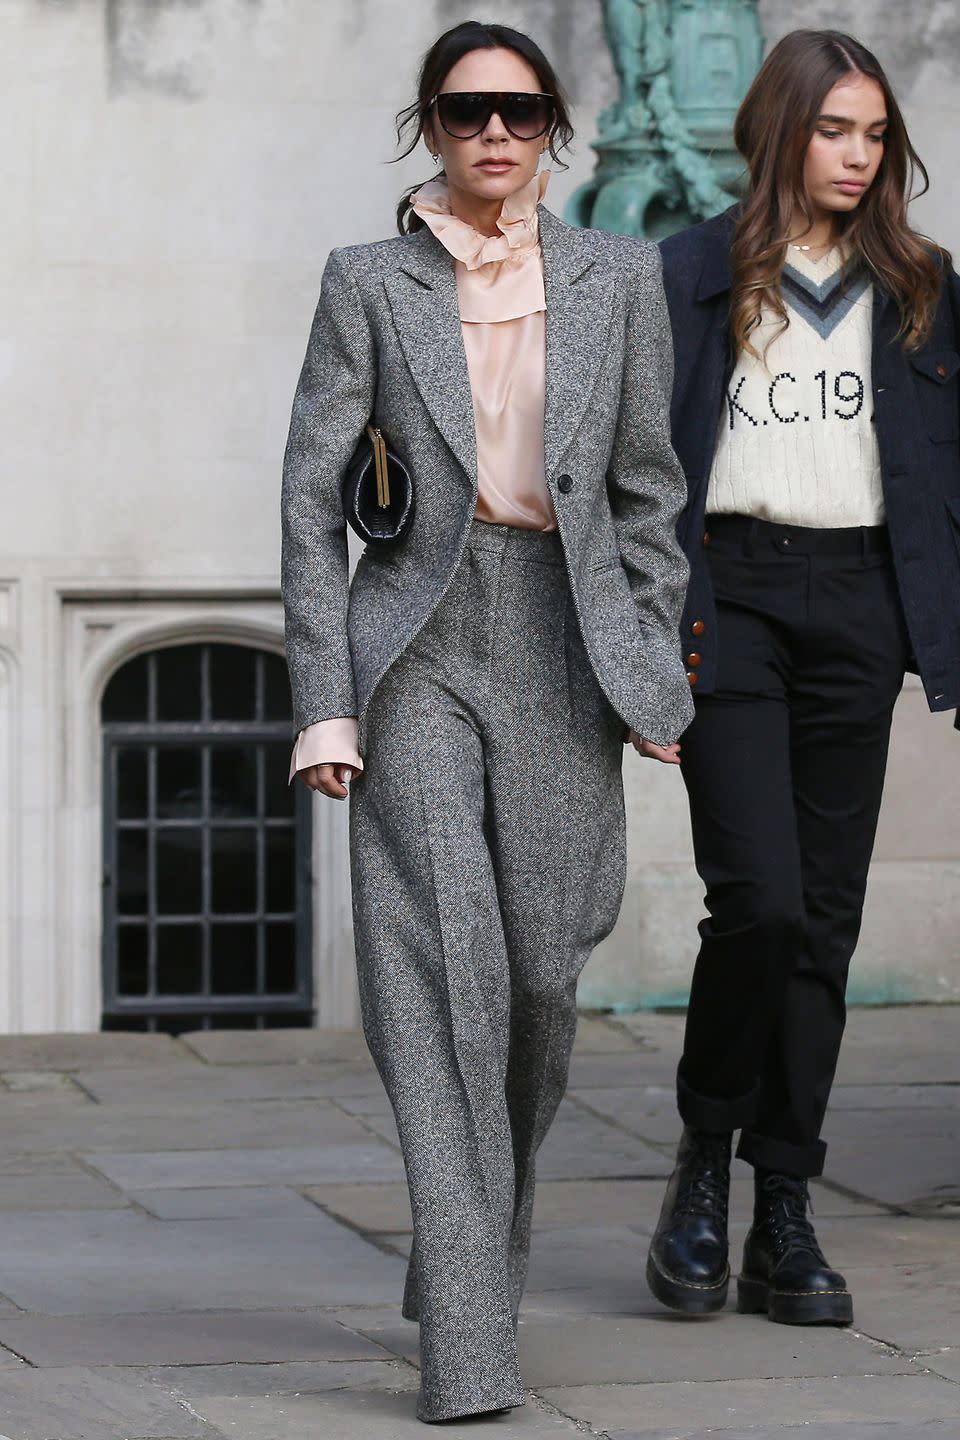 <p><strong>January 2019</strong> Victoria Beckham wore a wide-leg tweed suit with a sheer ruffled shirt to attend the menswear shows in London.</p>